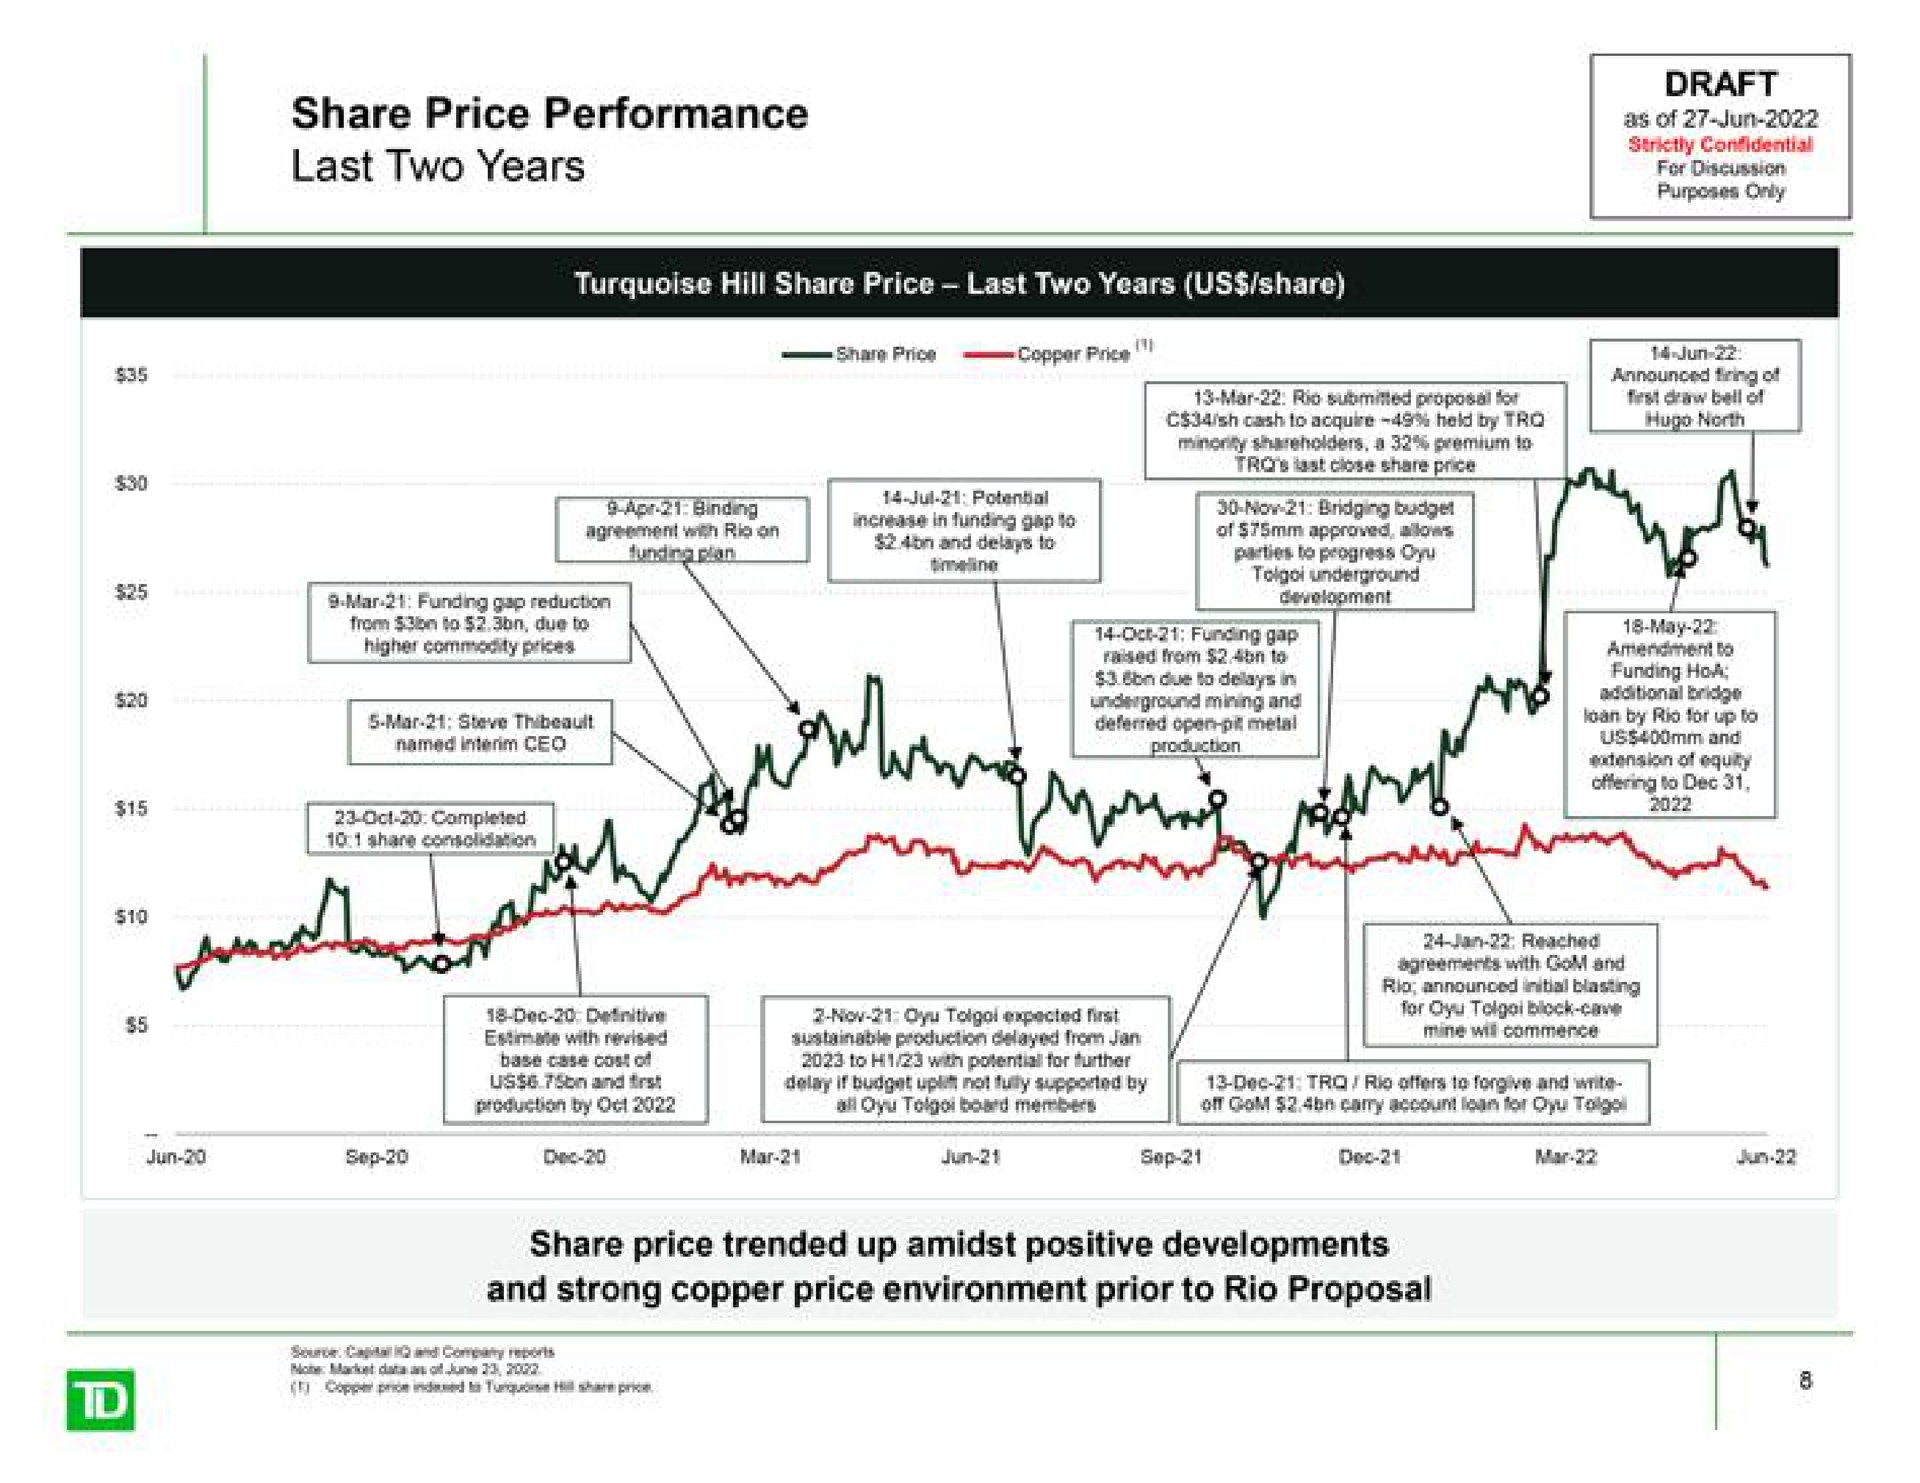 share price performance last two years as of far crag parties to a funding pian | TD Securities